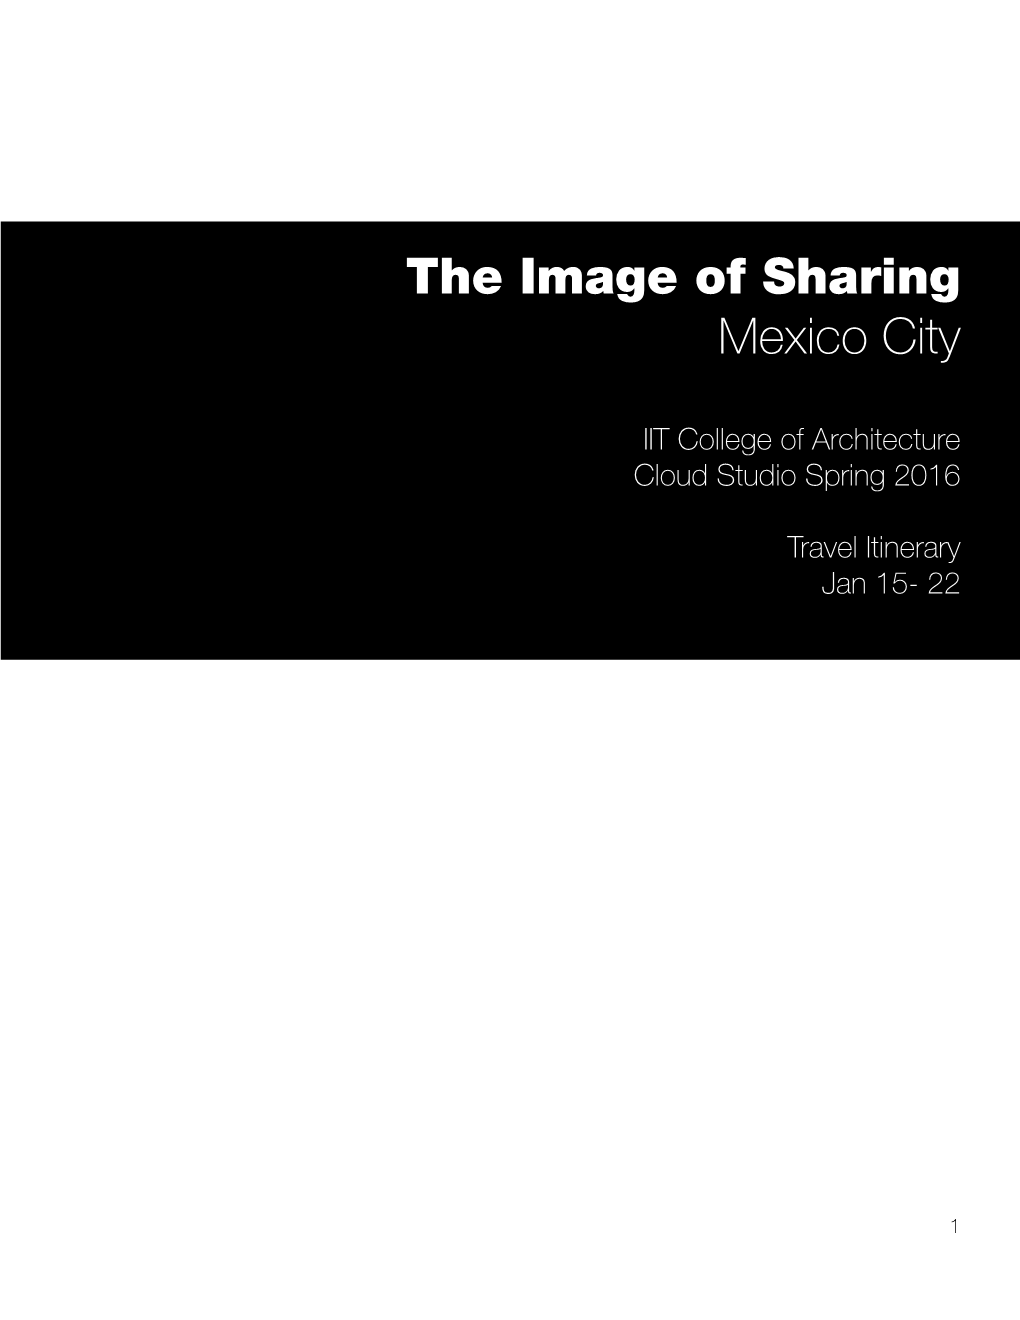 The Image of Sharing Mexico City